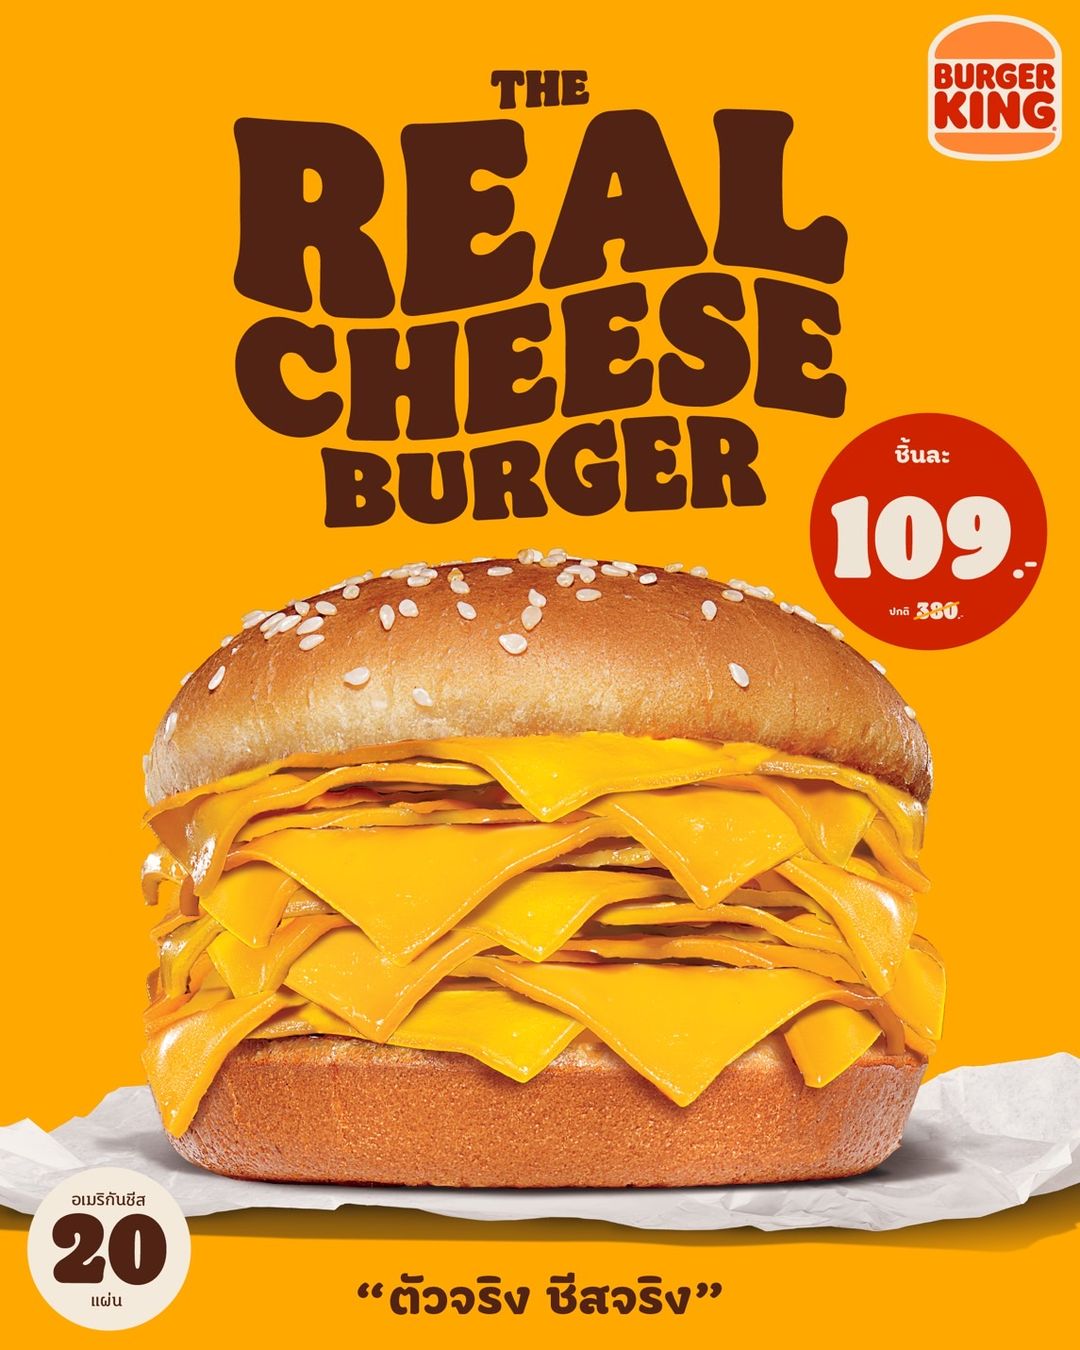 A Burger King Thailand ad featuring a sandwich with 20 slices of American cheese.